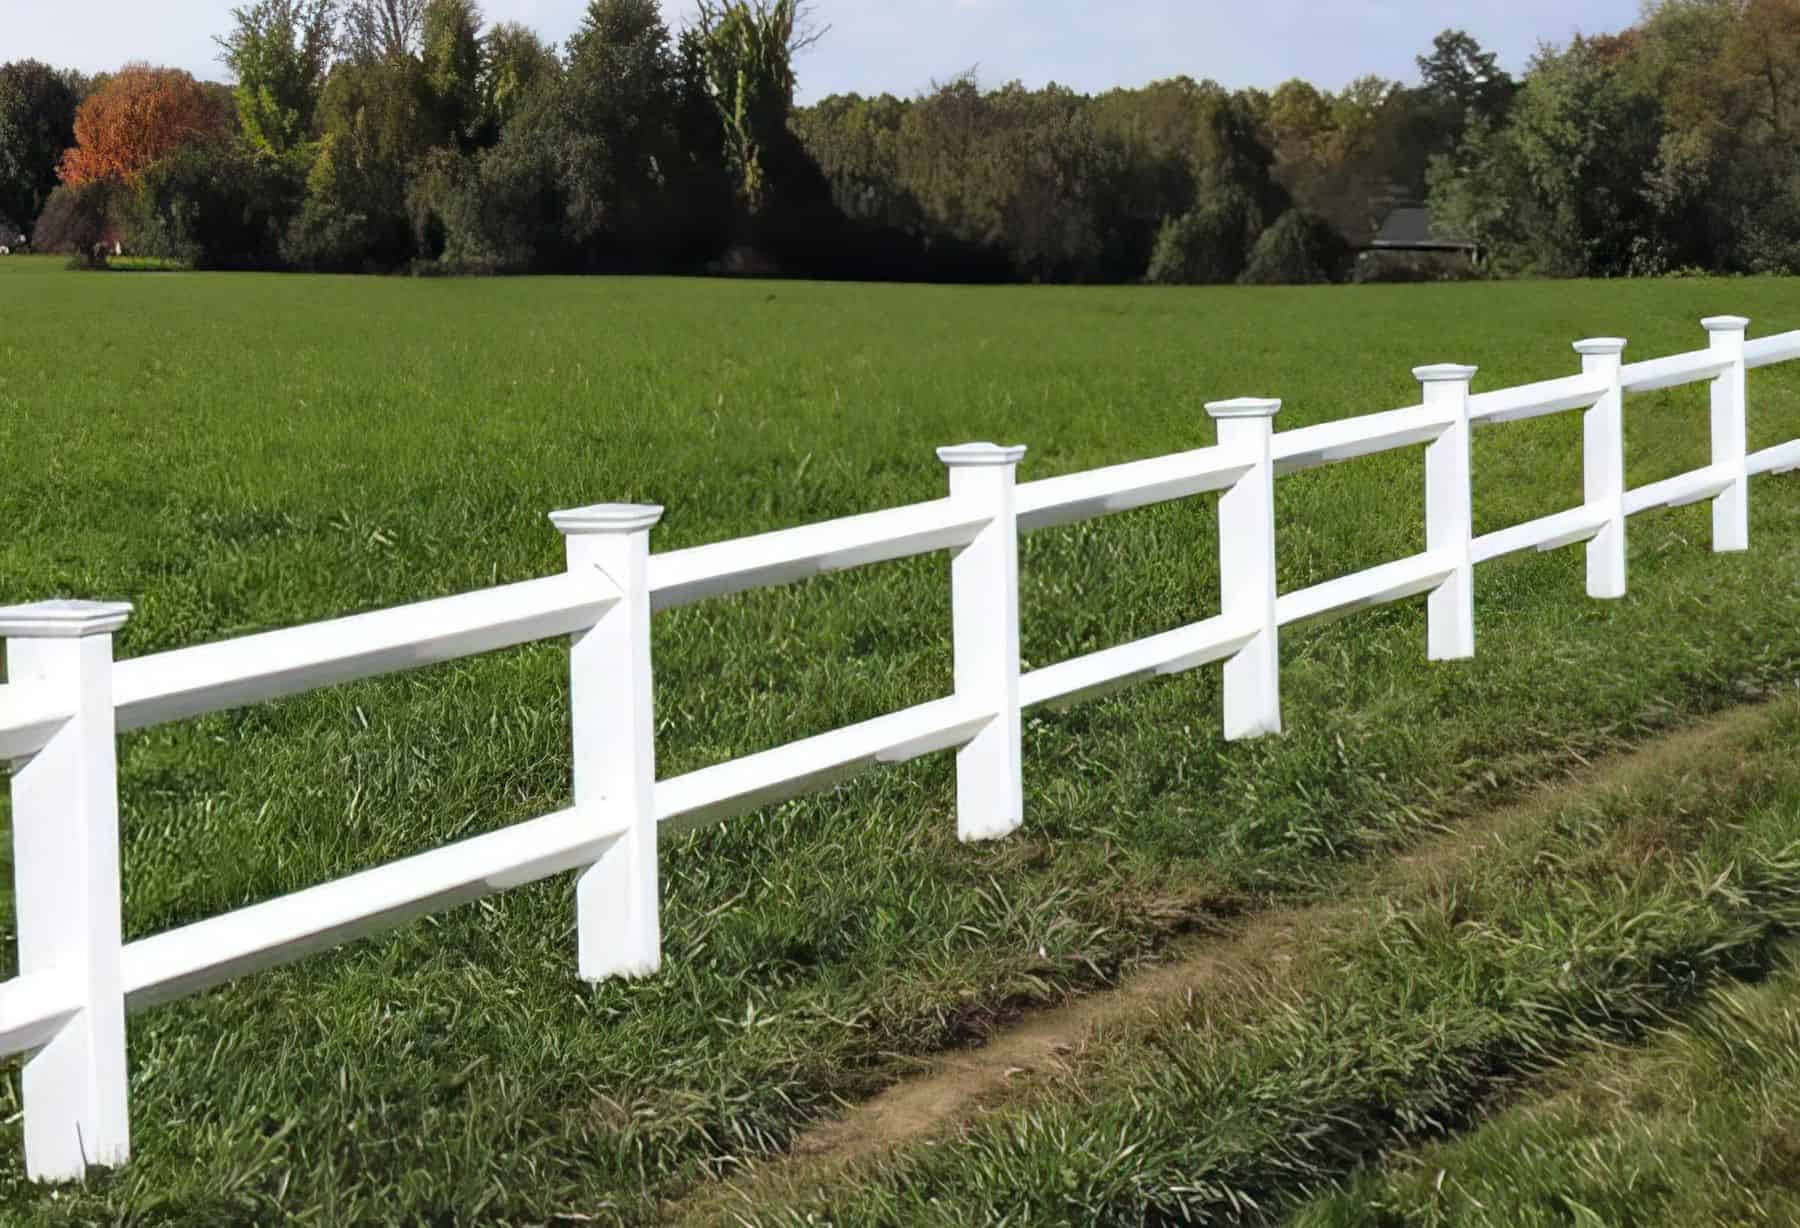 Vinyl 2-rail ranch fence in serene country setting: open field, lush grassy lawn, clear sky, trees in the background.